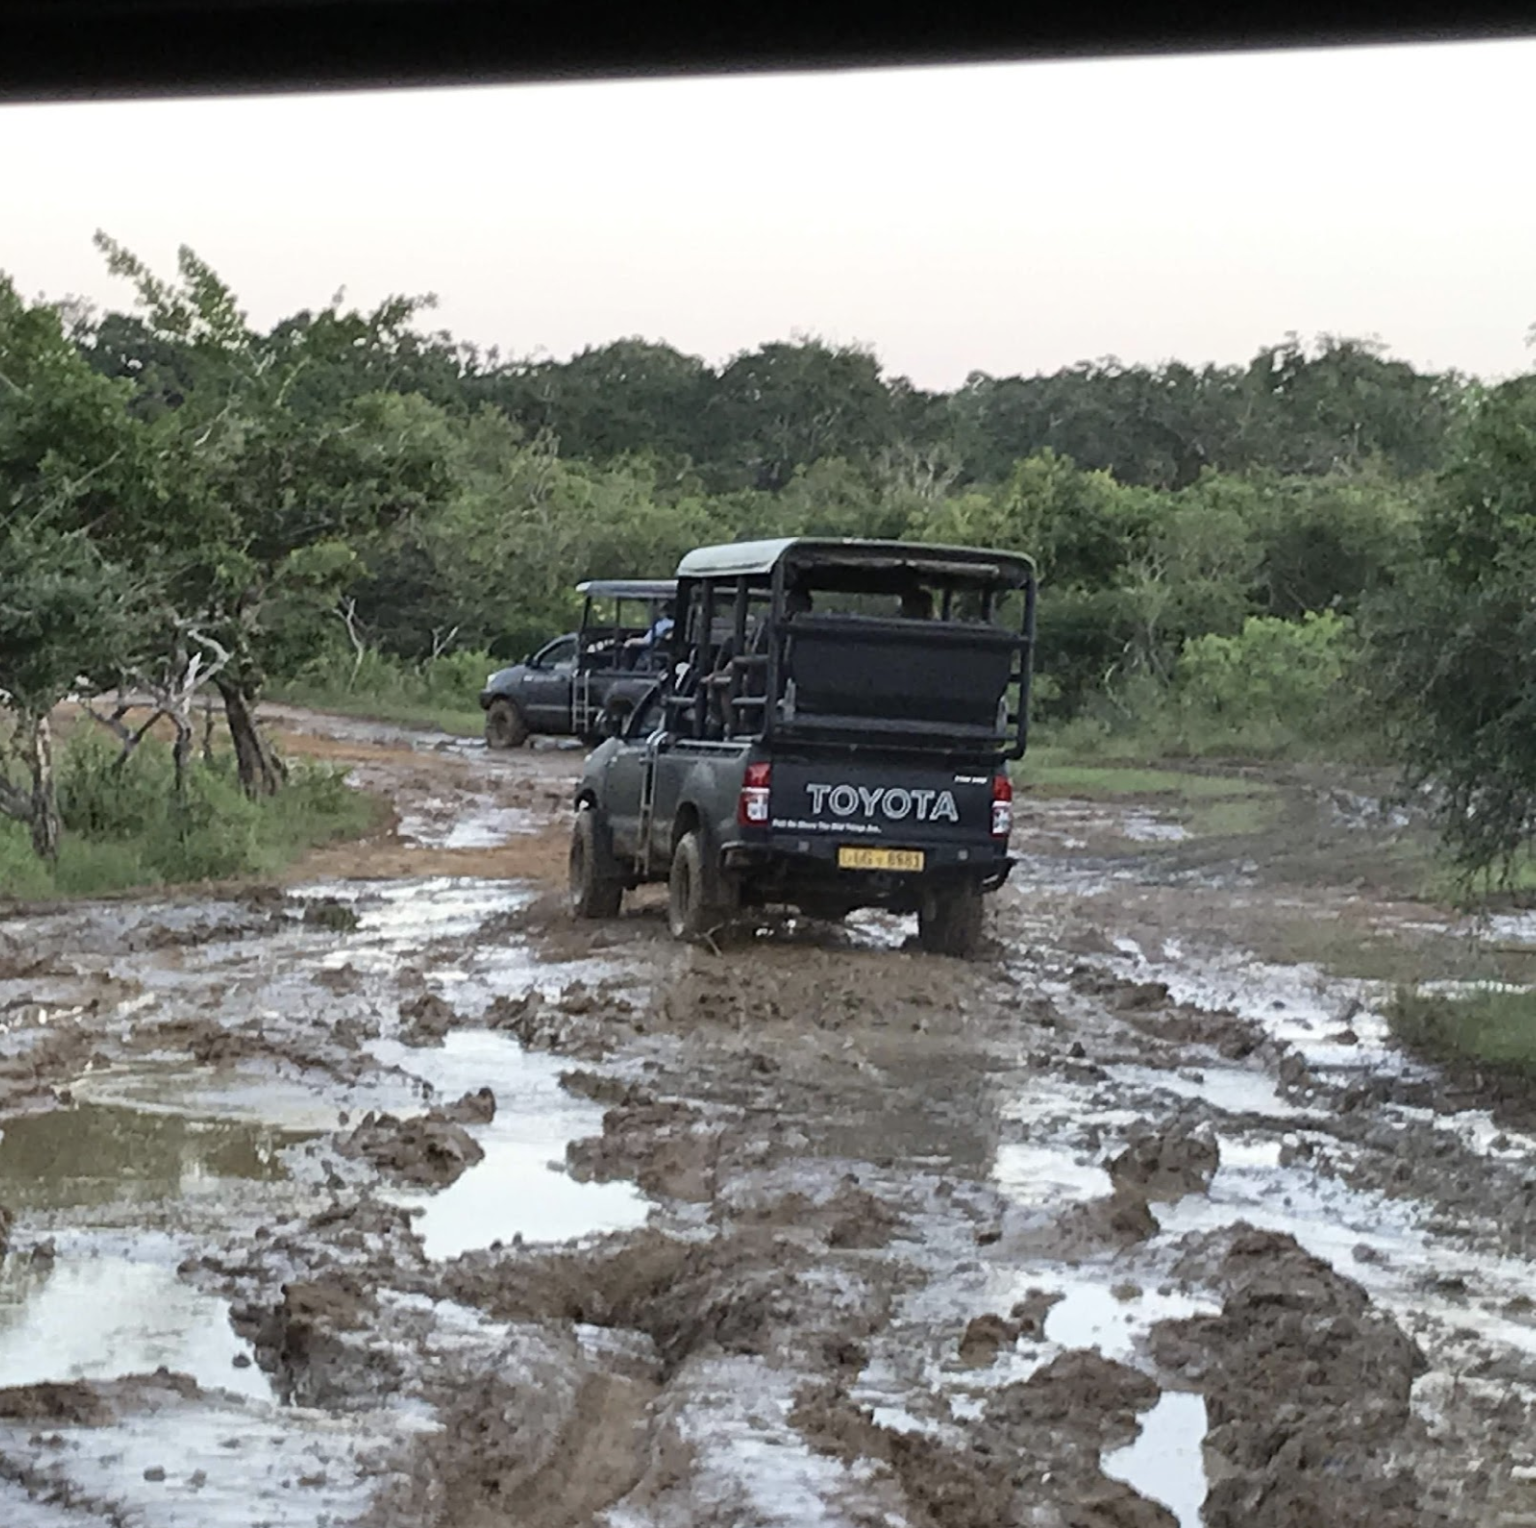 Image of toyota open roofed vehicle in muddy terrain